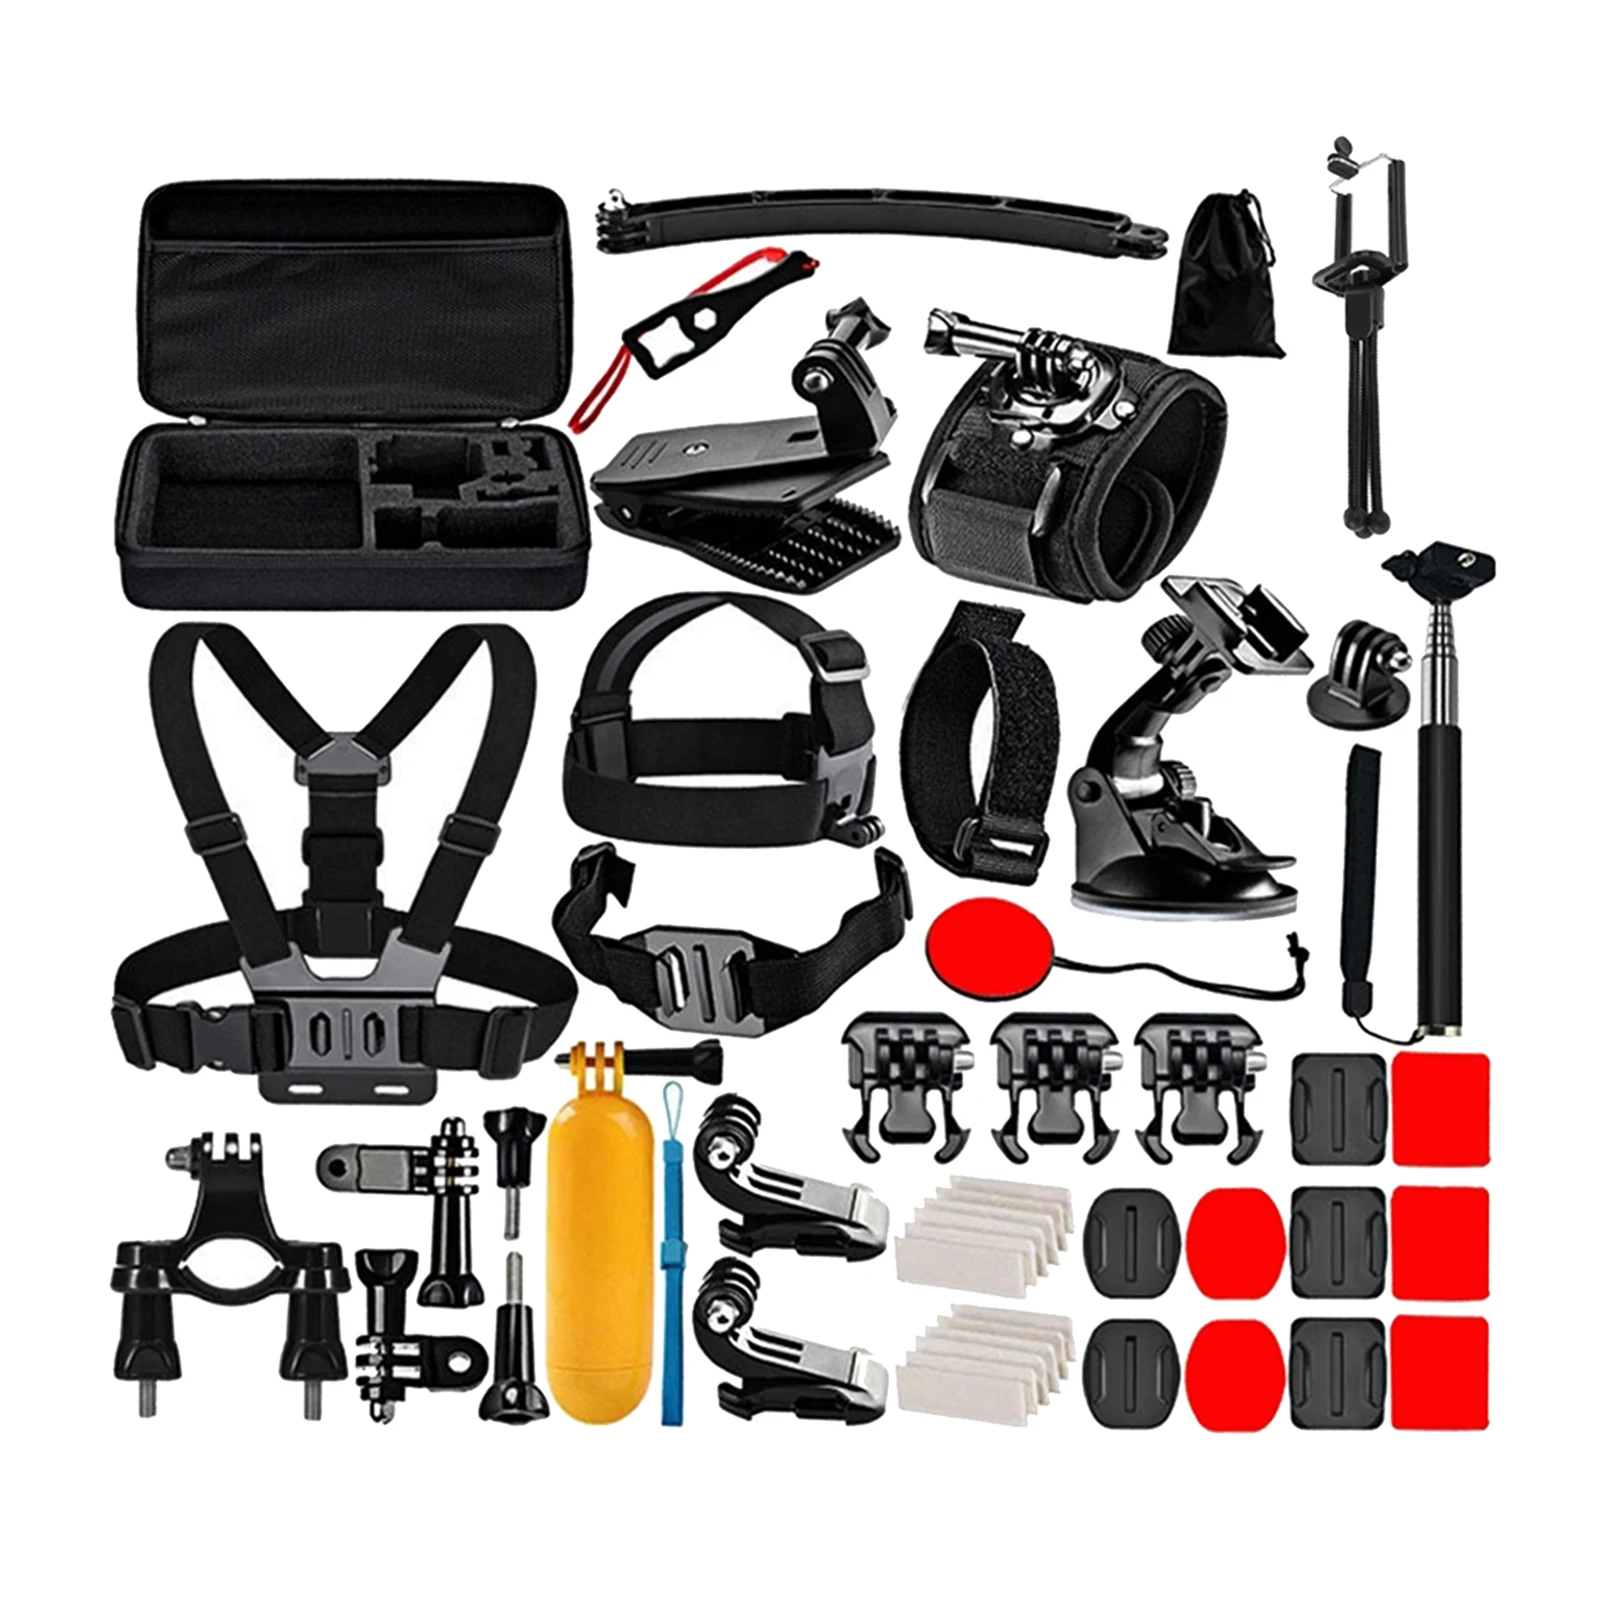 

50 in 1 Bundle Action Camera Accessory Kit for GoPro HERO9 8 Black 7 6 5 5 Session 4 Session 3+ 2 Action Cameras